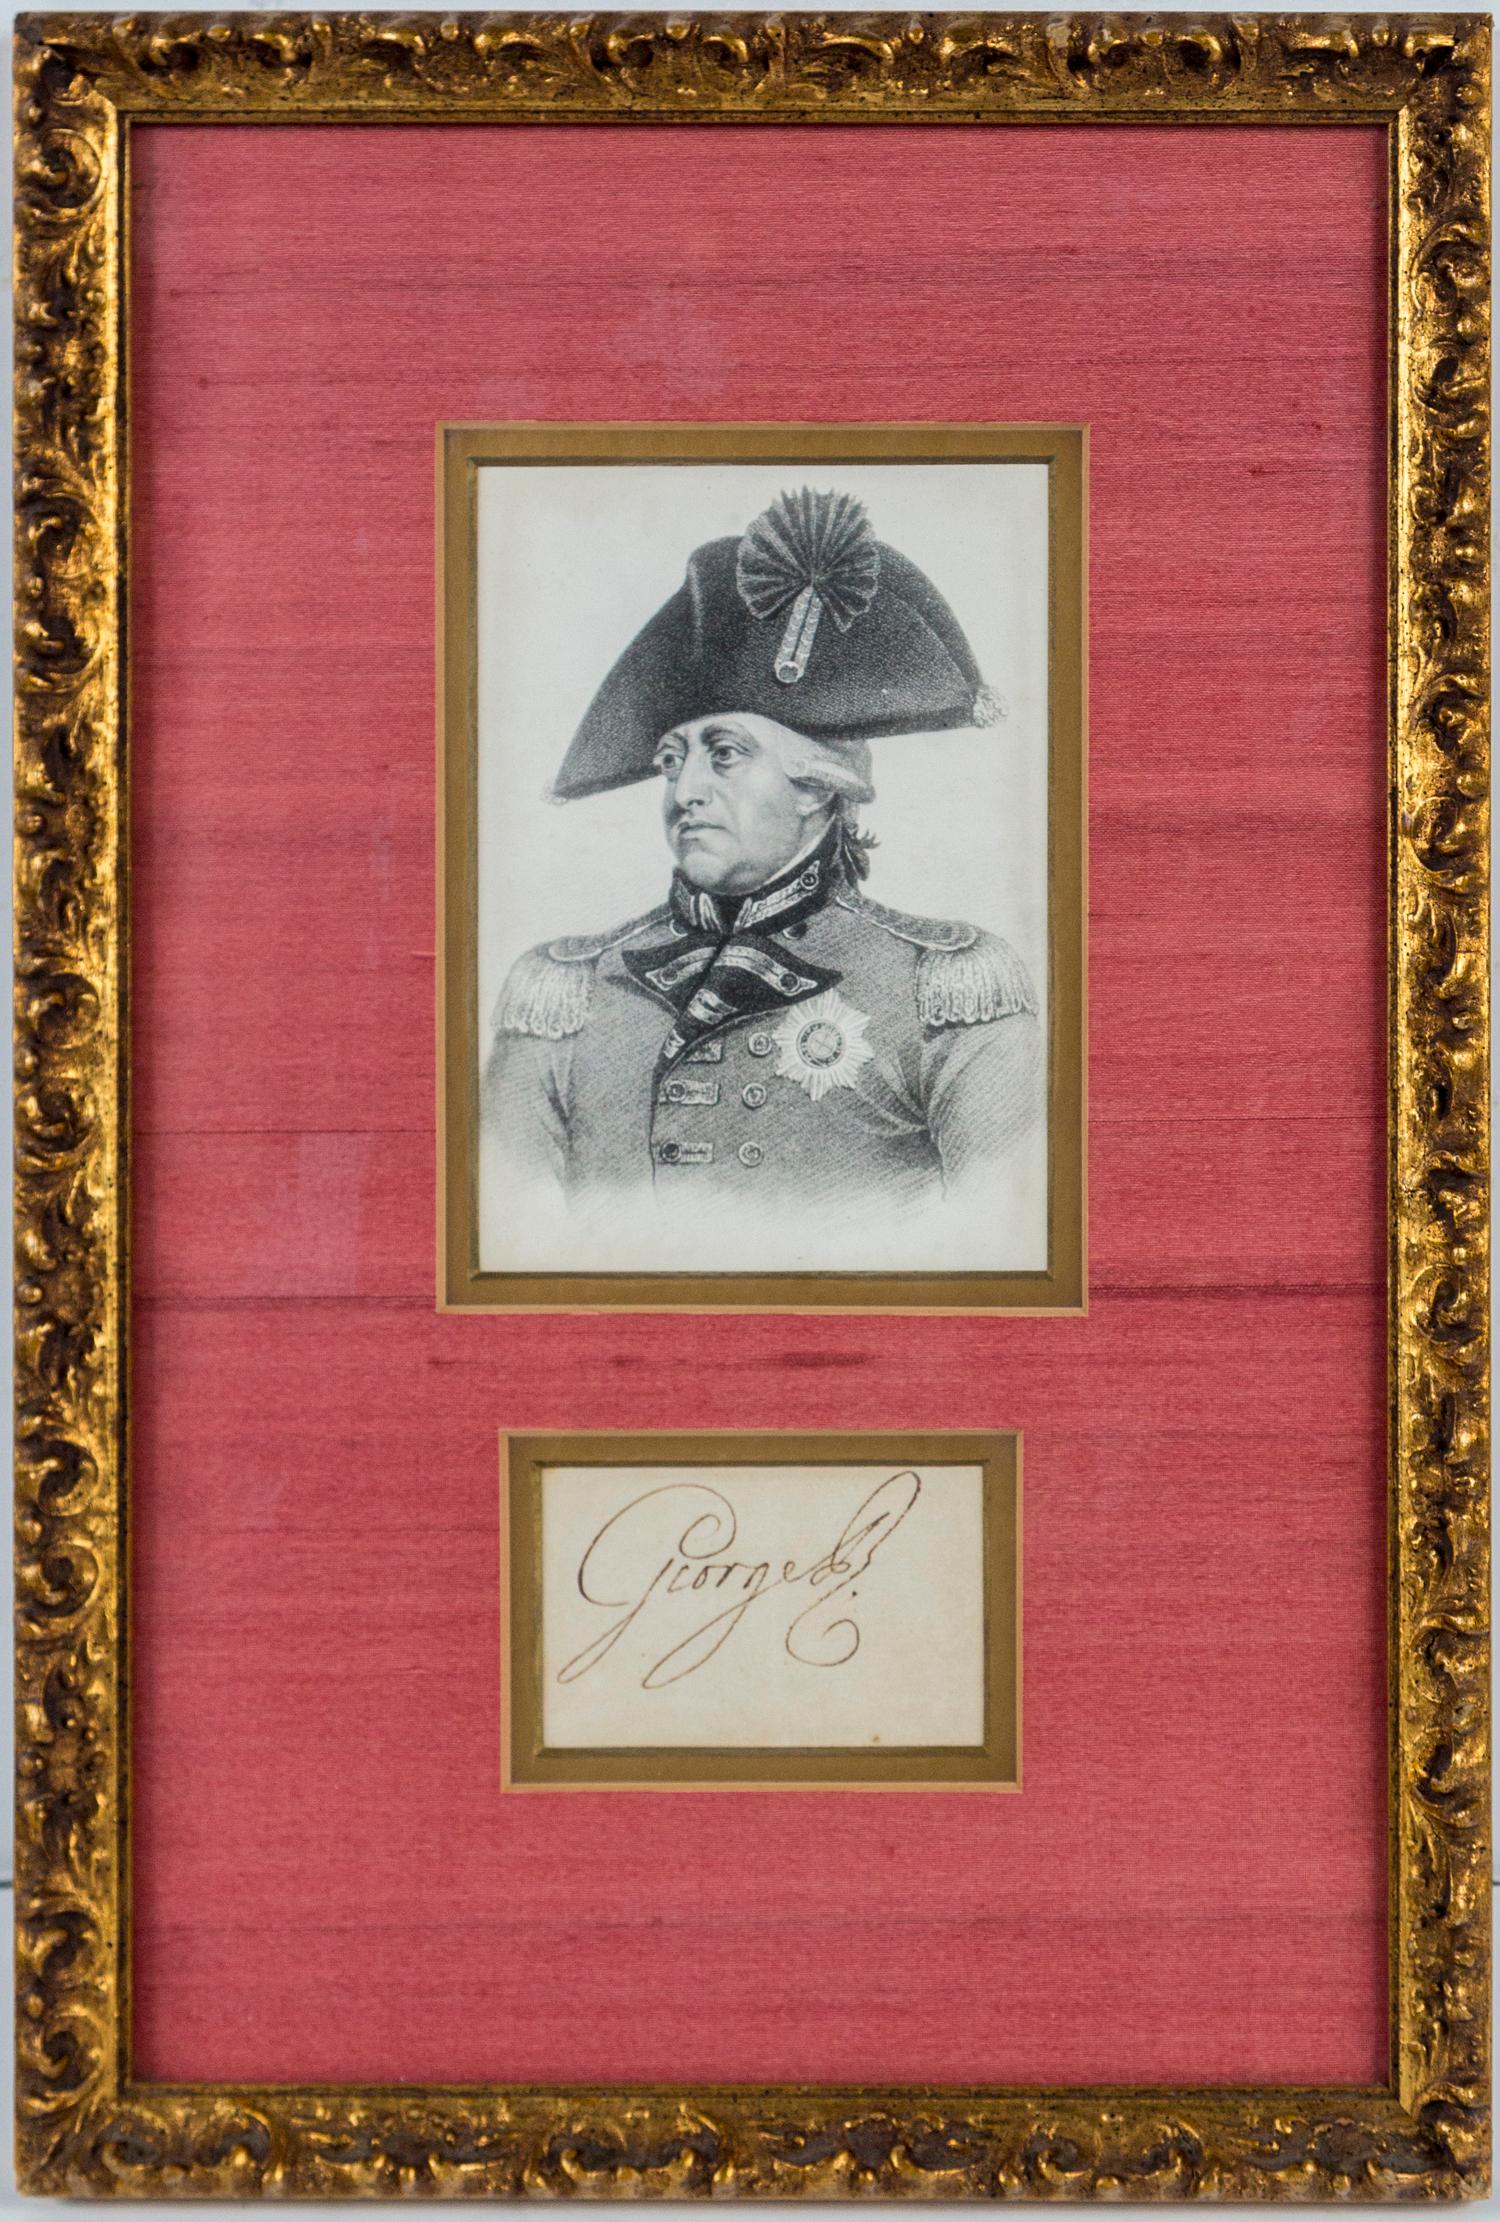 An engraving of King George III of Great Britain and Ireland, together with his signature. Neither examined out of frame. He wears a military uniform and hat of the late 18th century-early 19th century.
The autograph George R as King of Great